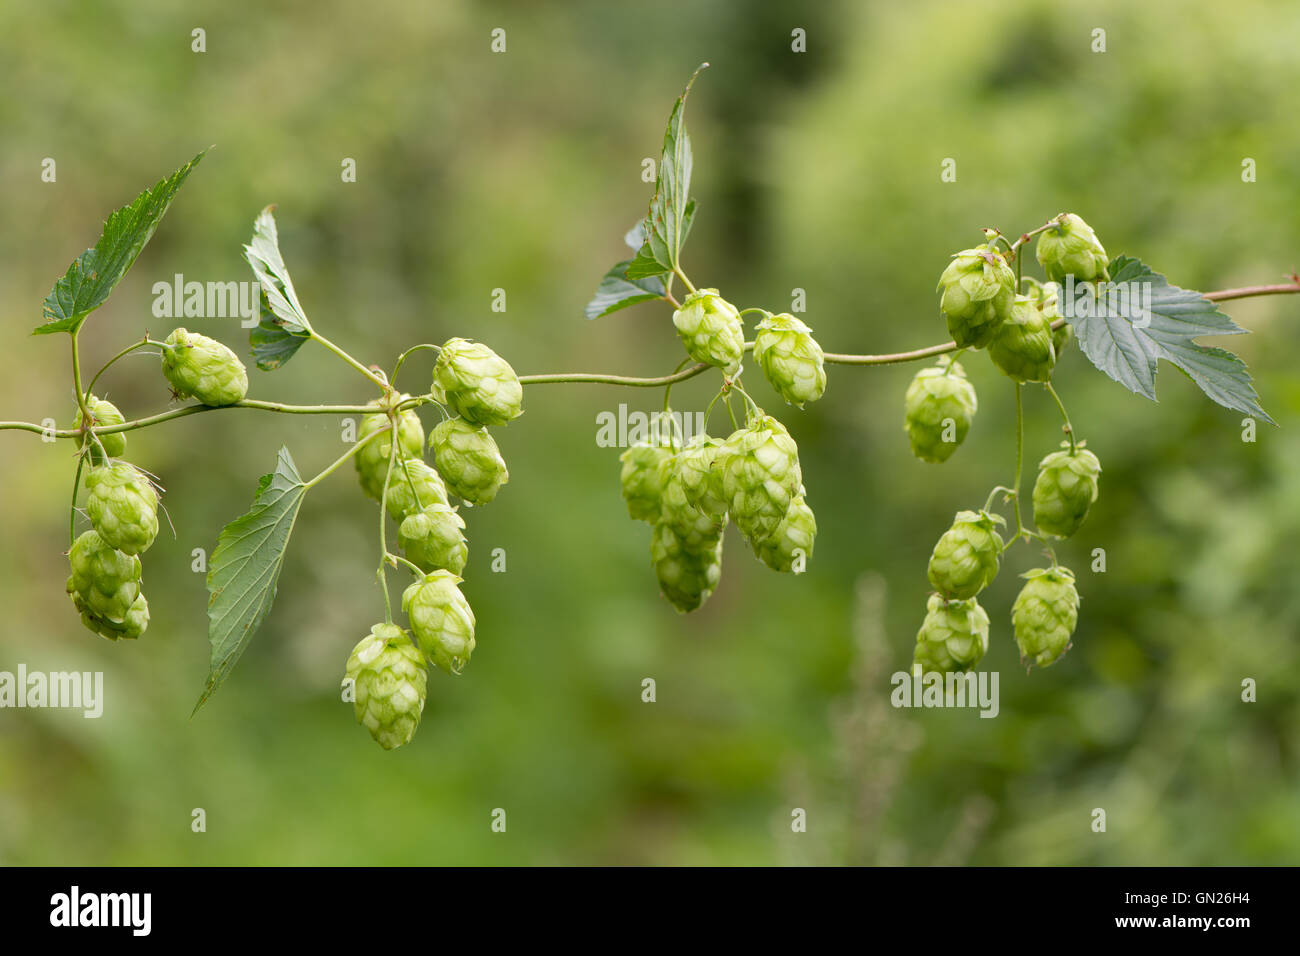 Hops (Humulus lupulus) flowers on vine. Green pendulous flowers on climbing plant in the family Cannabaceae, hanging from stem Stock Photo